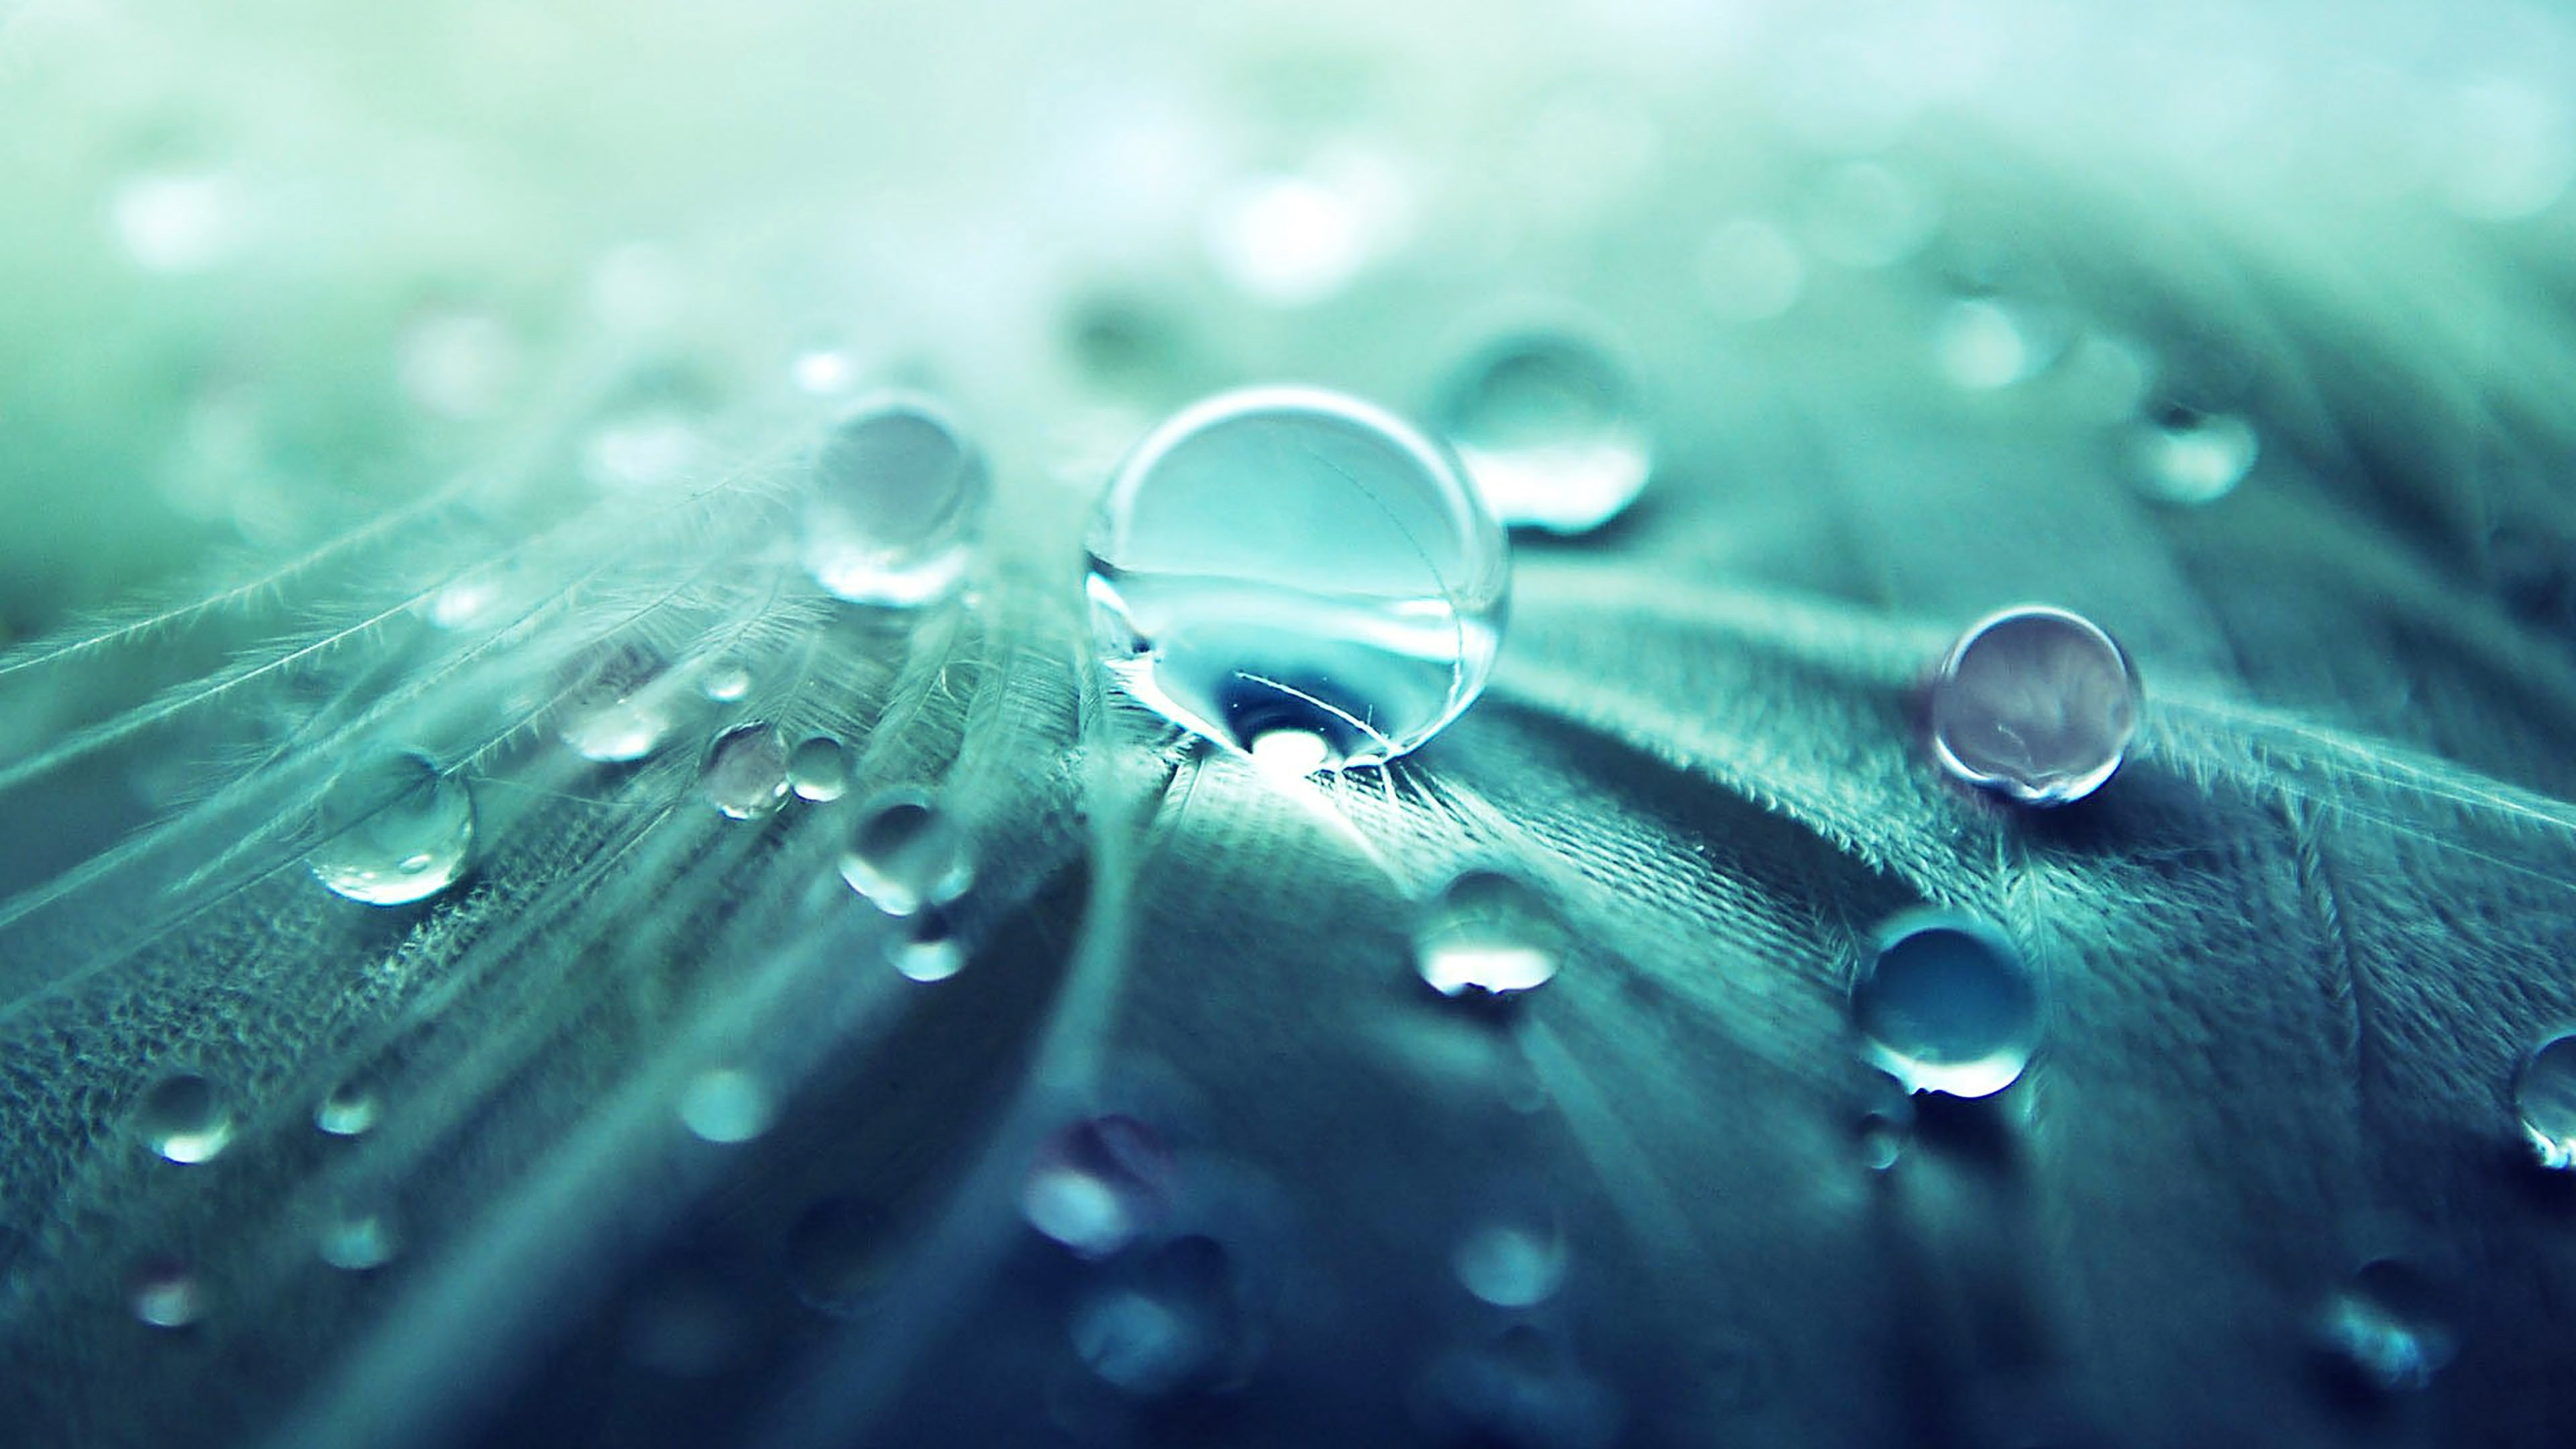 Round Rain Drops on a Leaf wallpaper | nature and landscape | Wallpaper